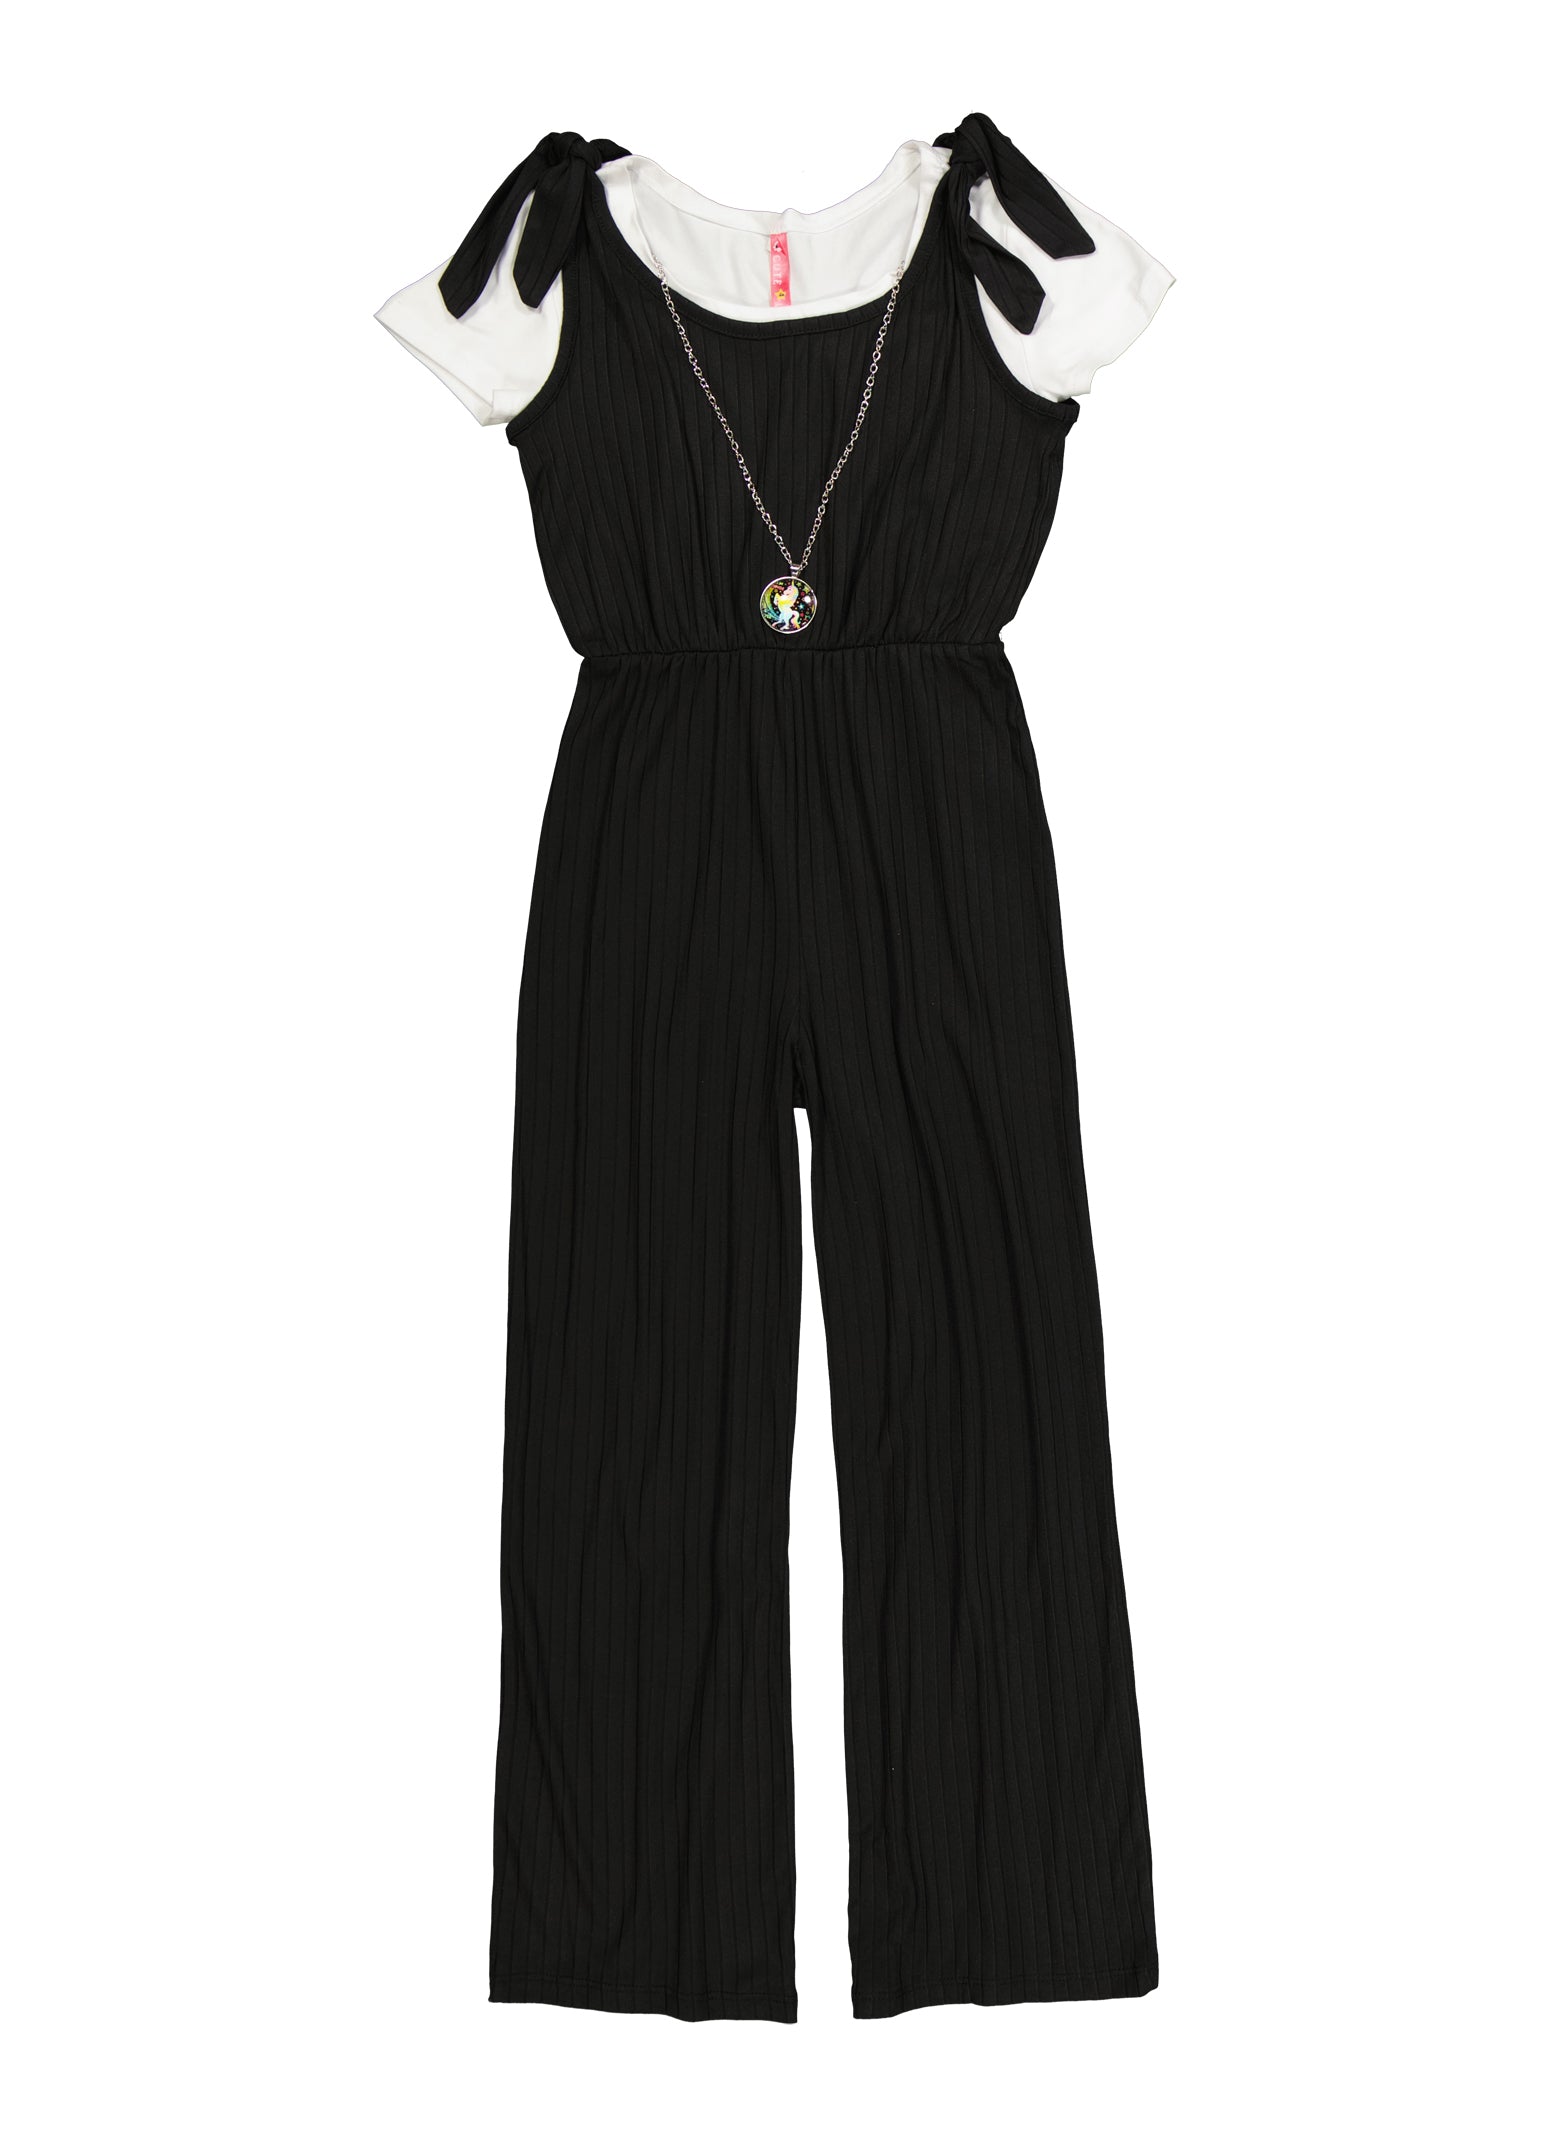 Next girls fashion smart formal black Jumpsuit Outfit 12 Years | eBay